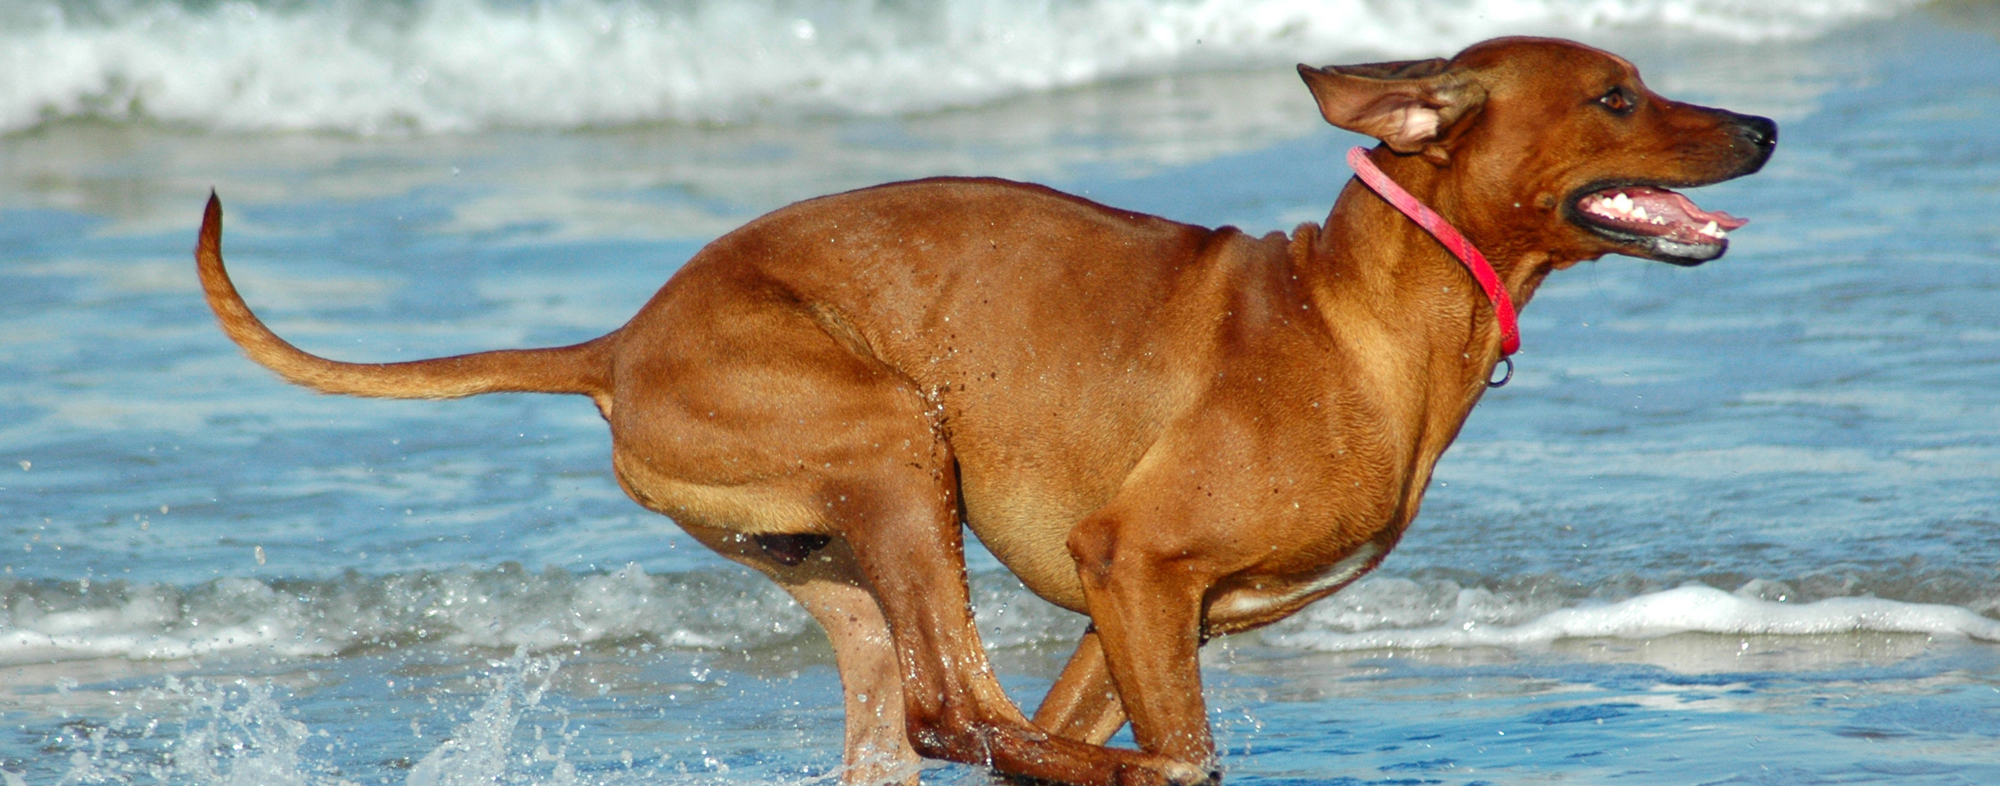 During the summer, your dog may enjoy running along the beach